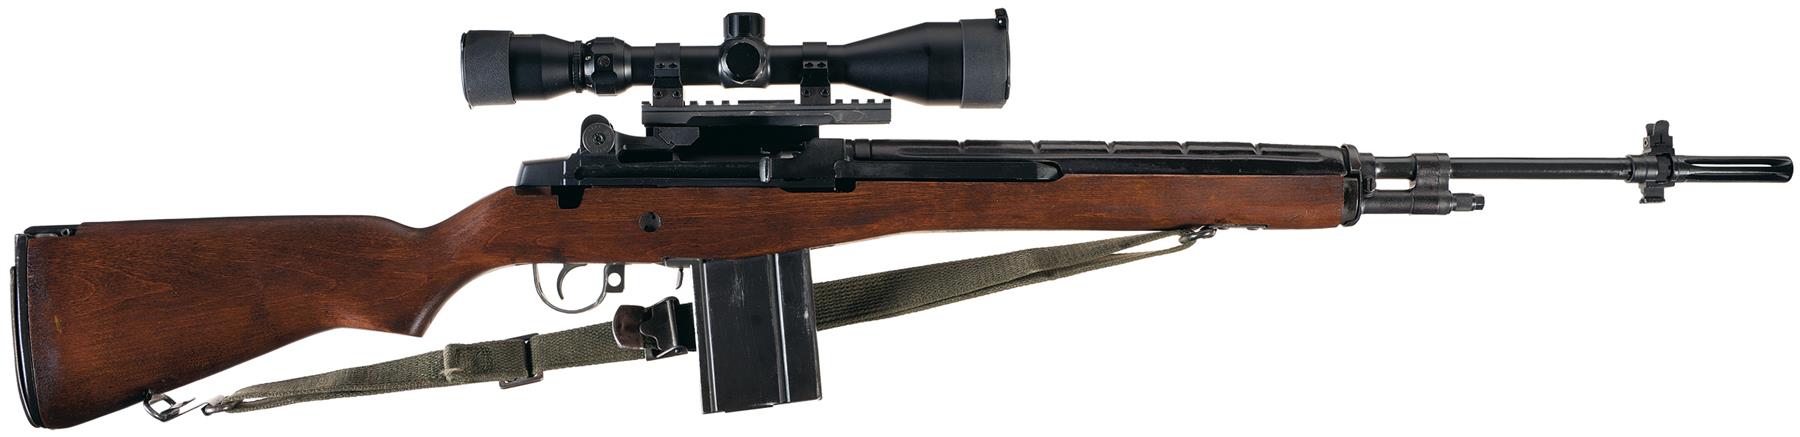 federal ordnance m14 review